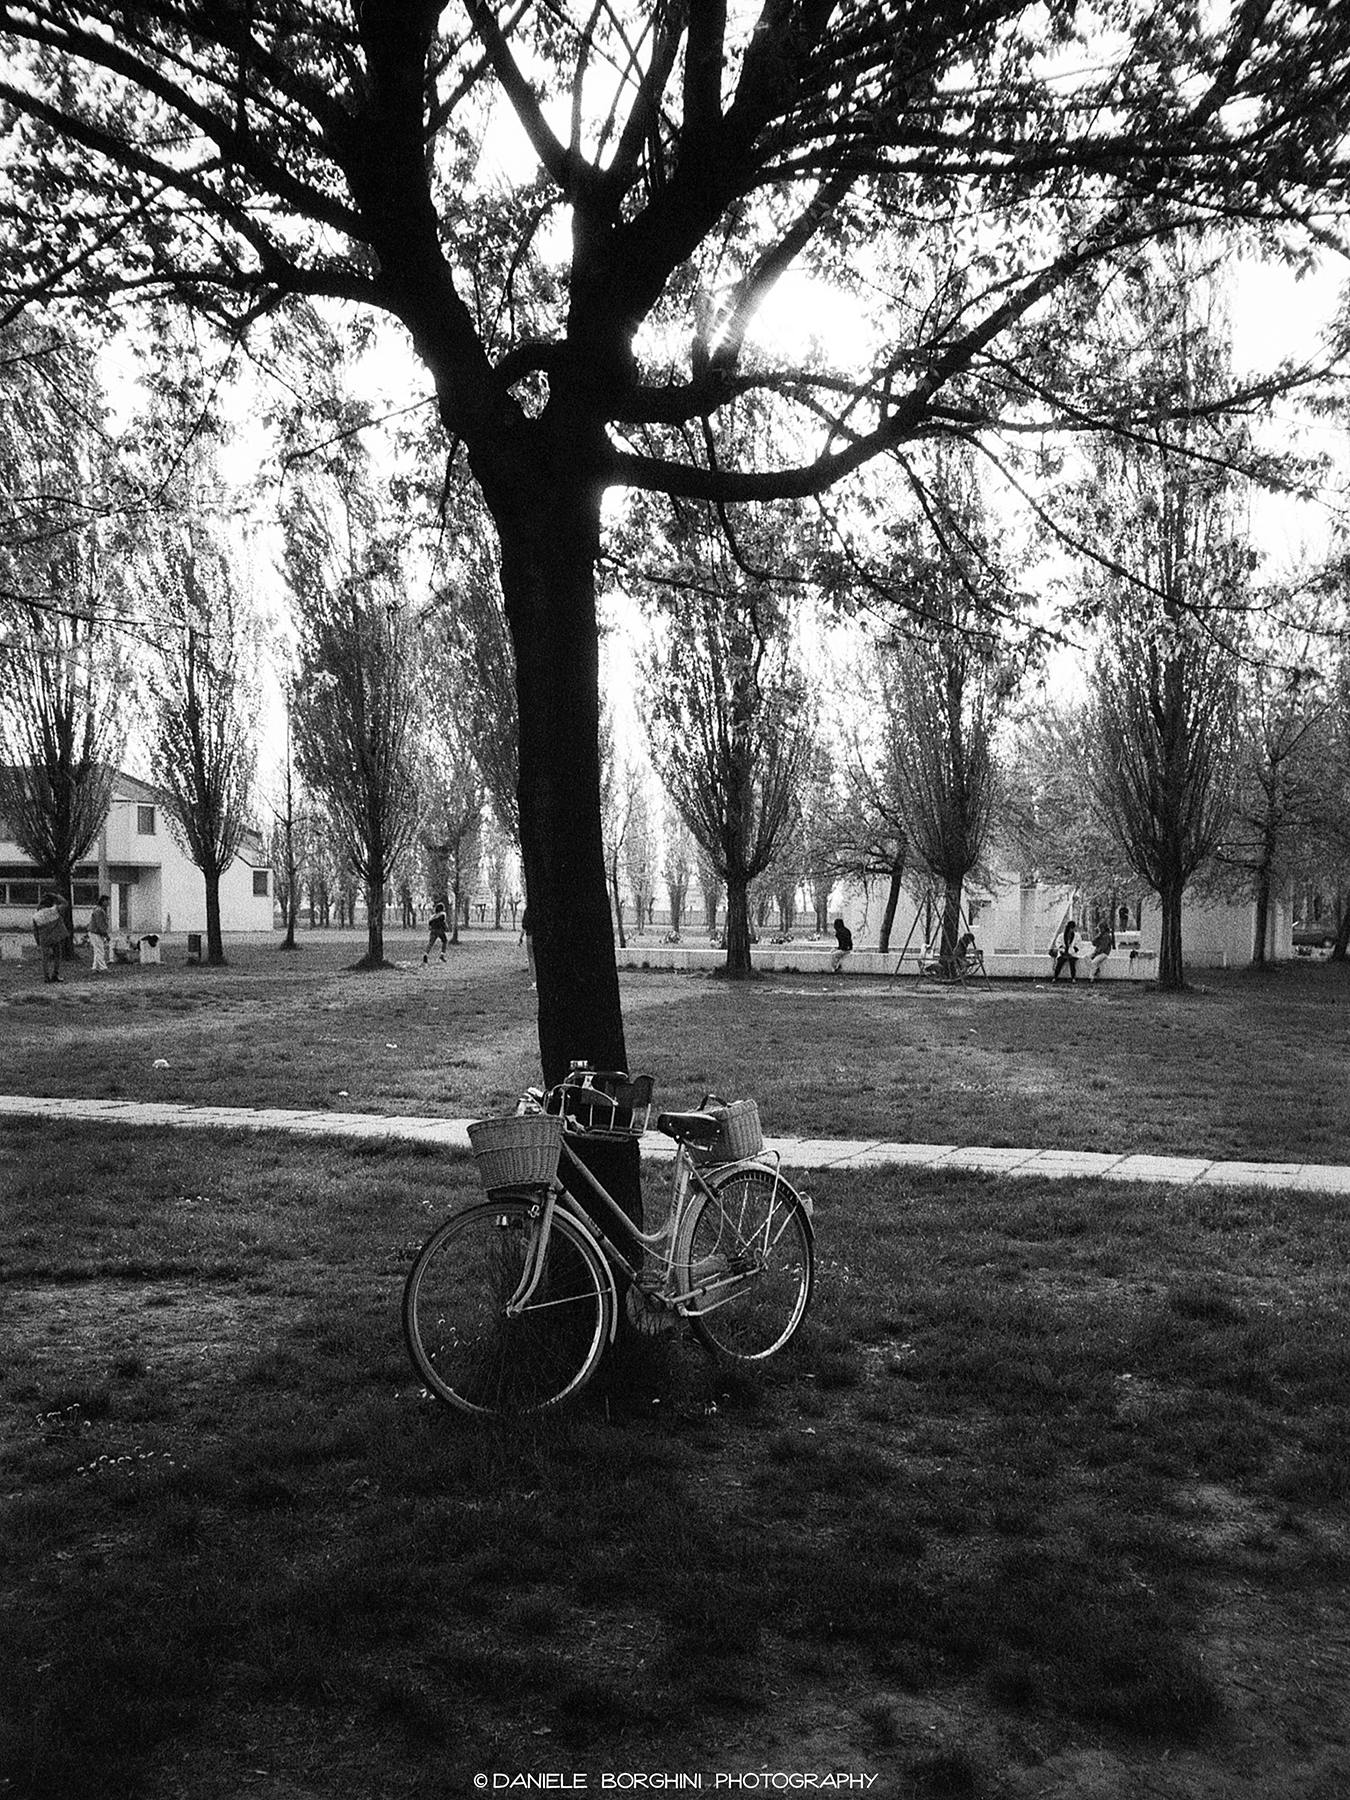 The Bike and the Tree...